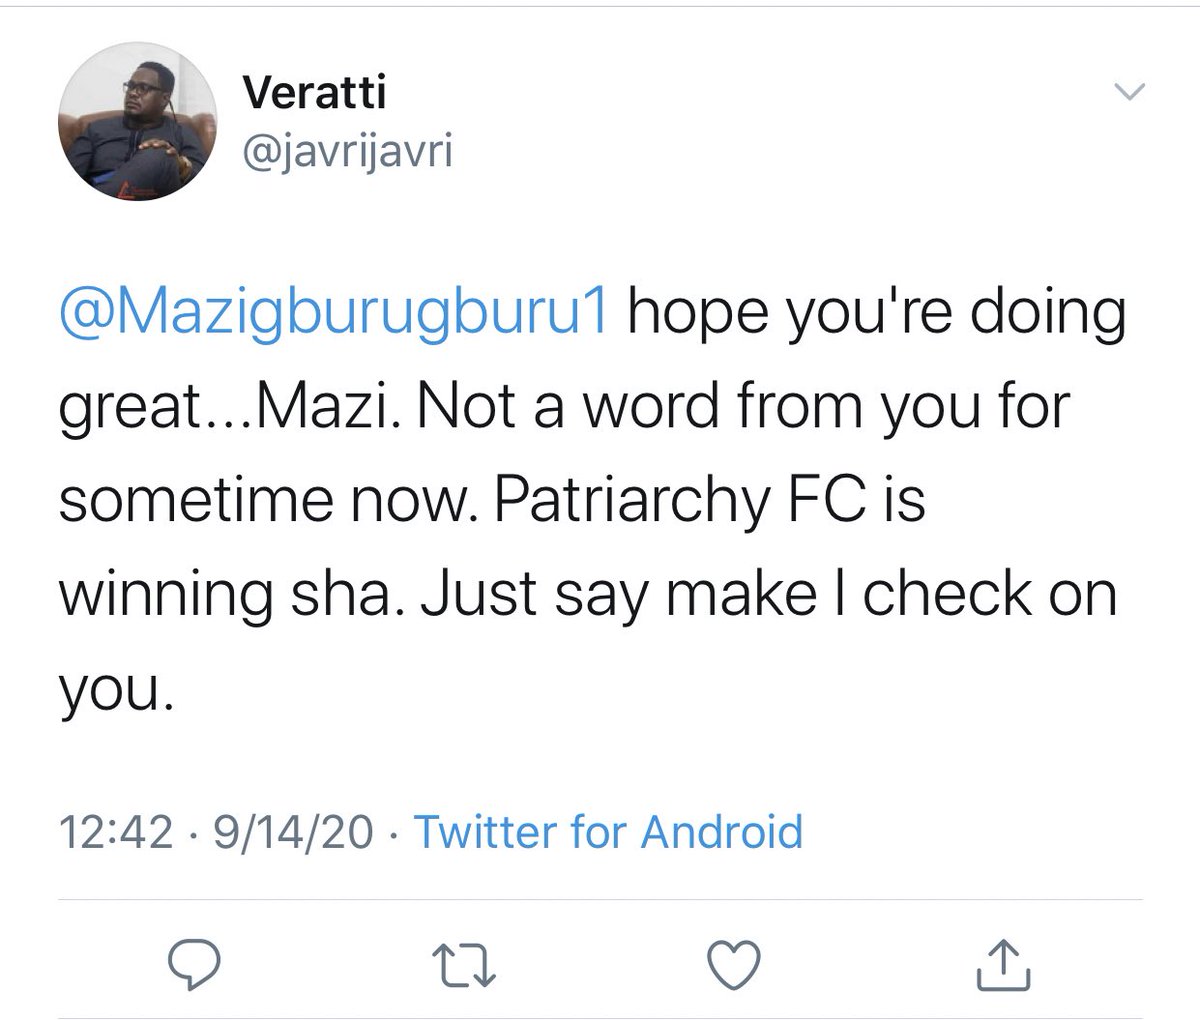 From Patriarchy FC talent scout to oppressed citizen in 2 weeks flat!